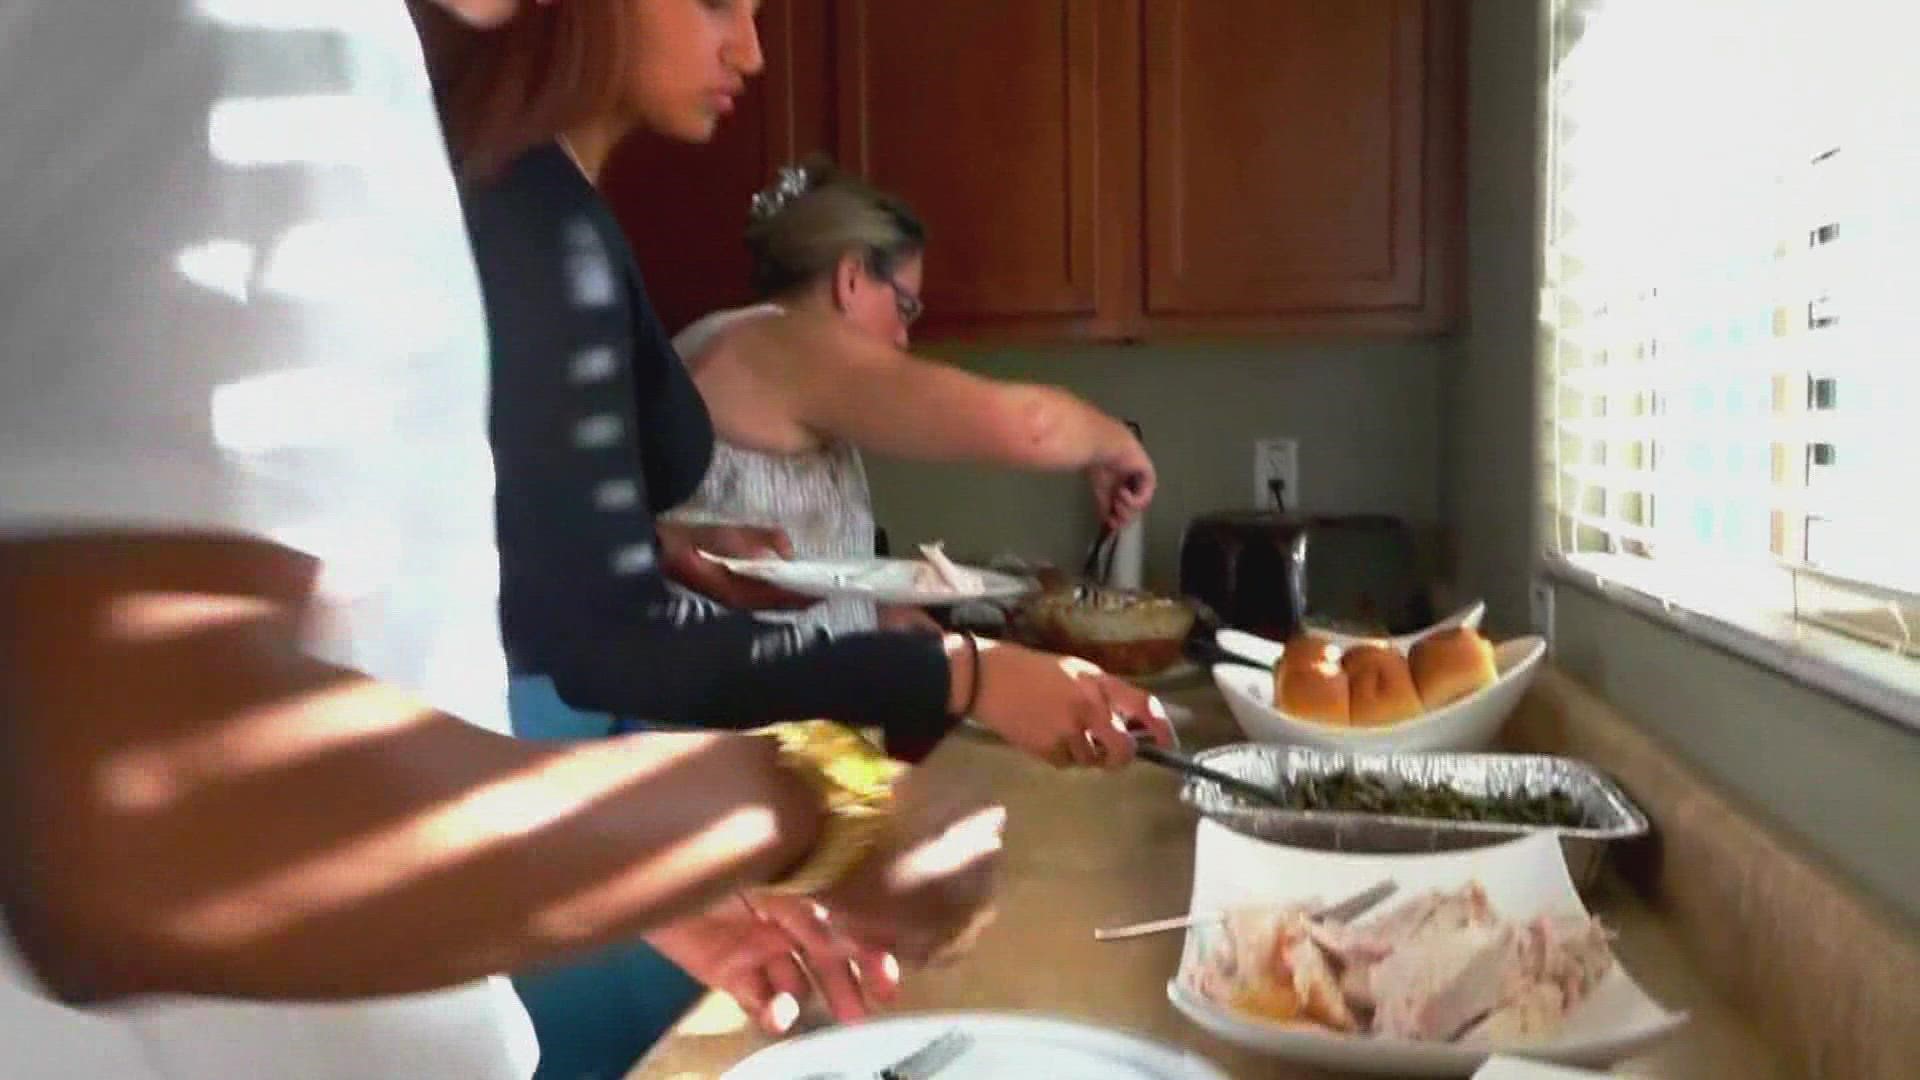 Thanksgiving traditionally brings people together, but that can come with stress.